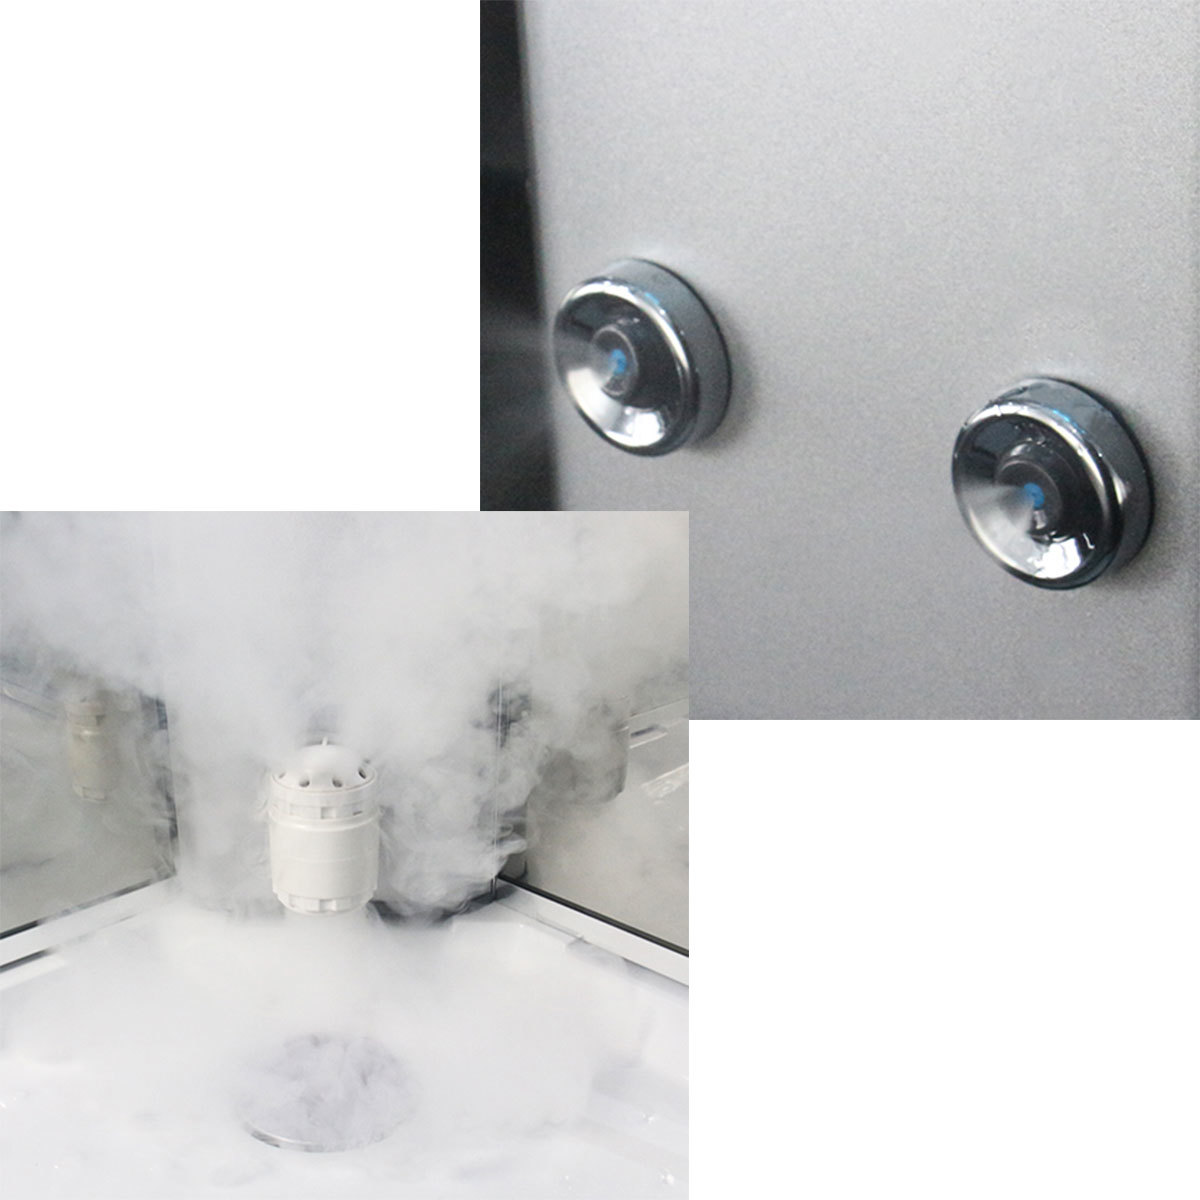 Lifestyle compiled image of shower features